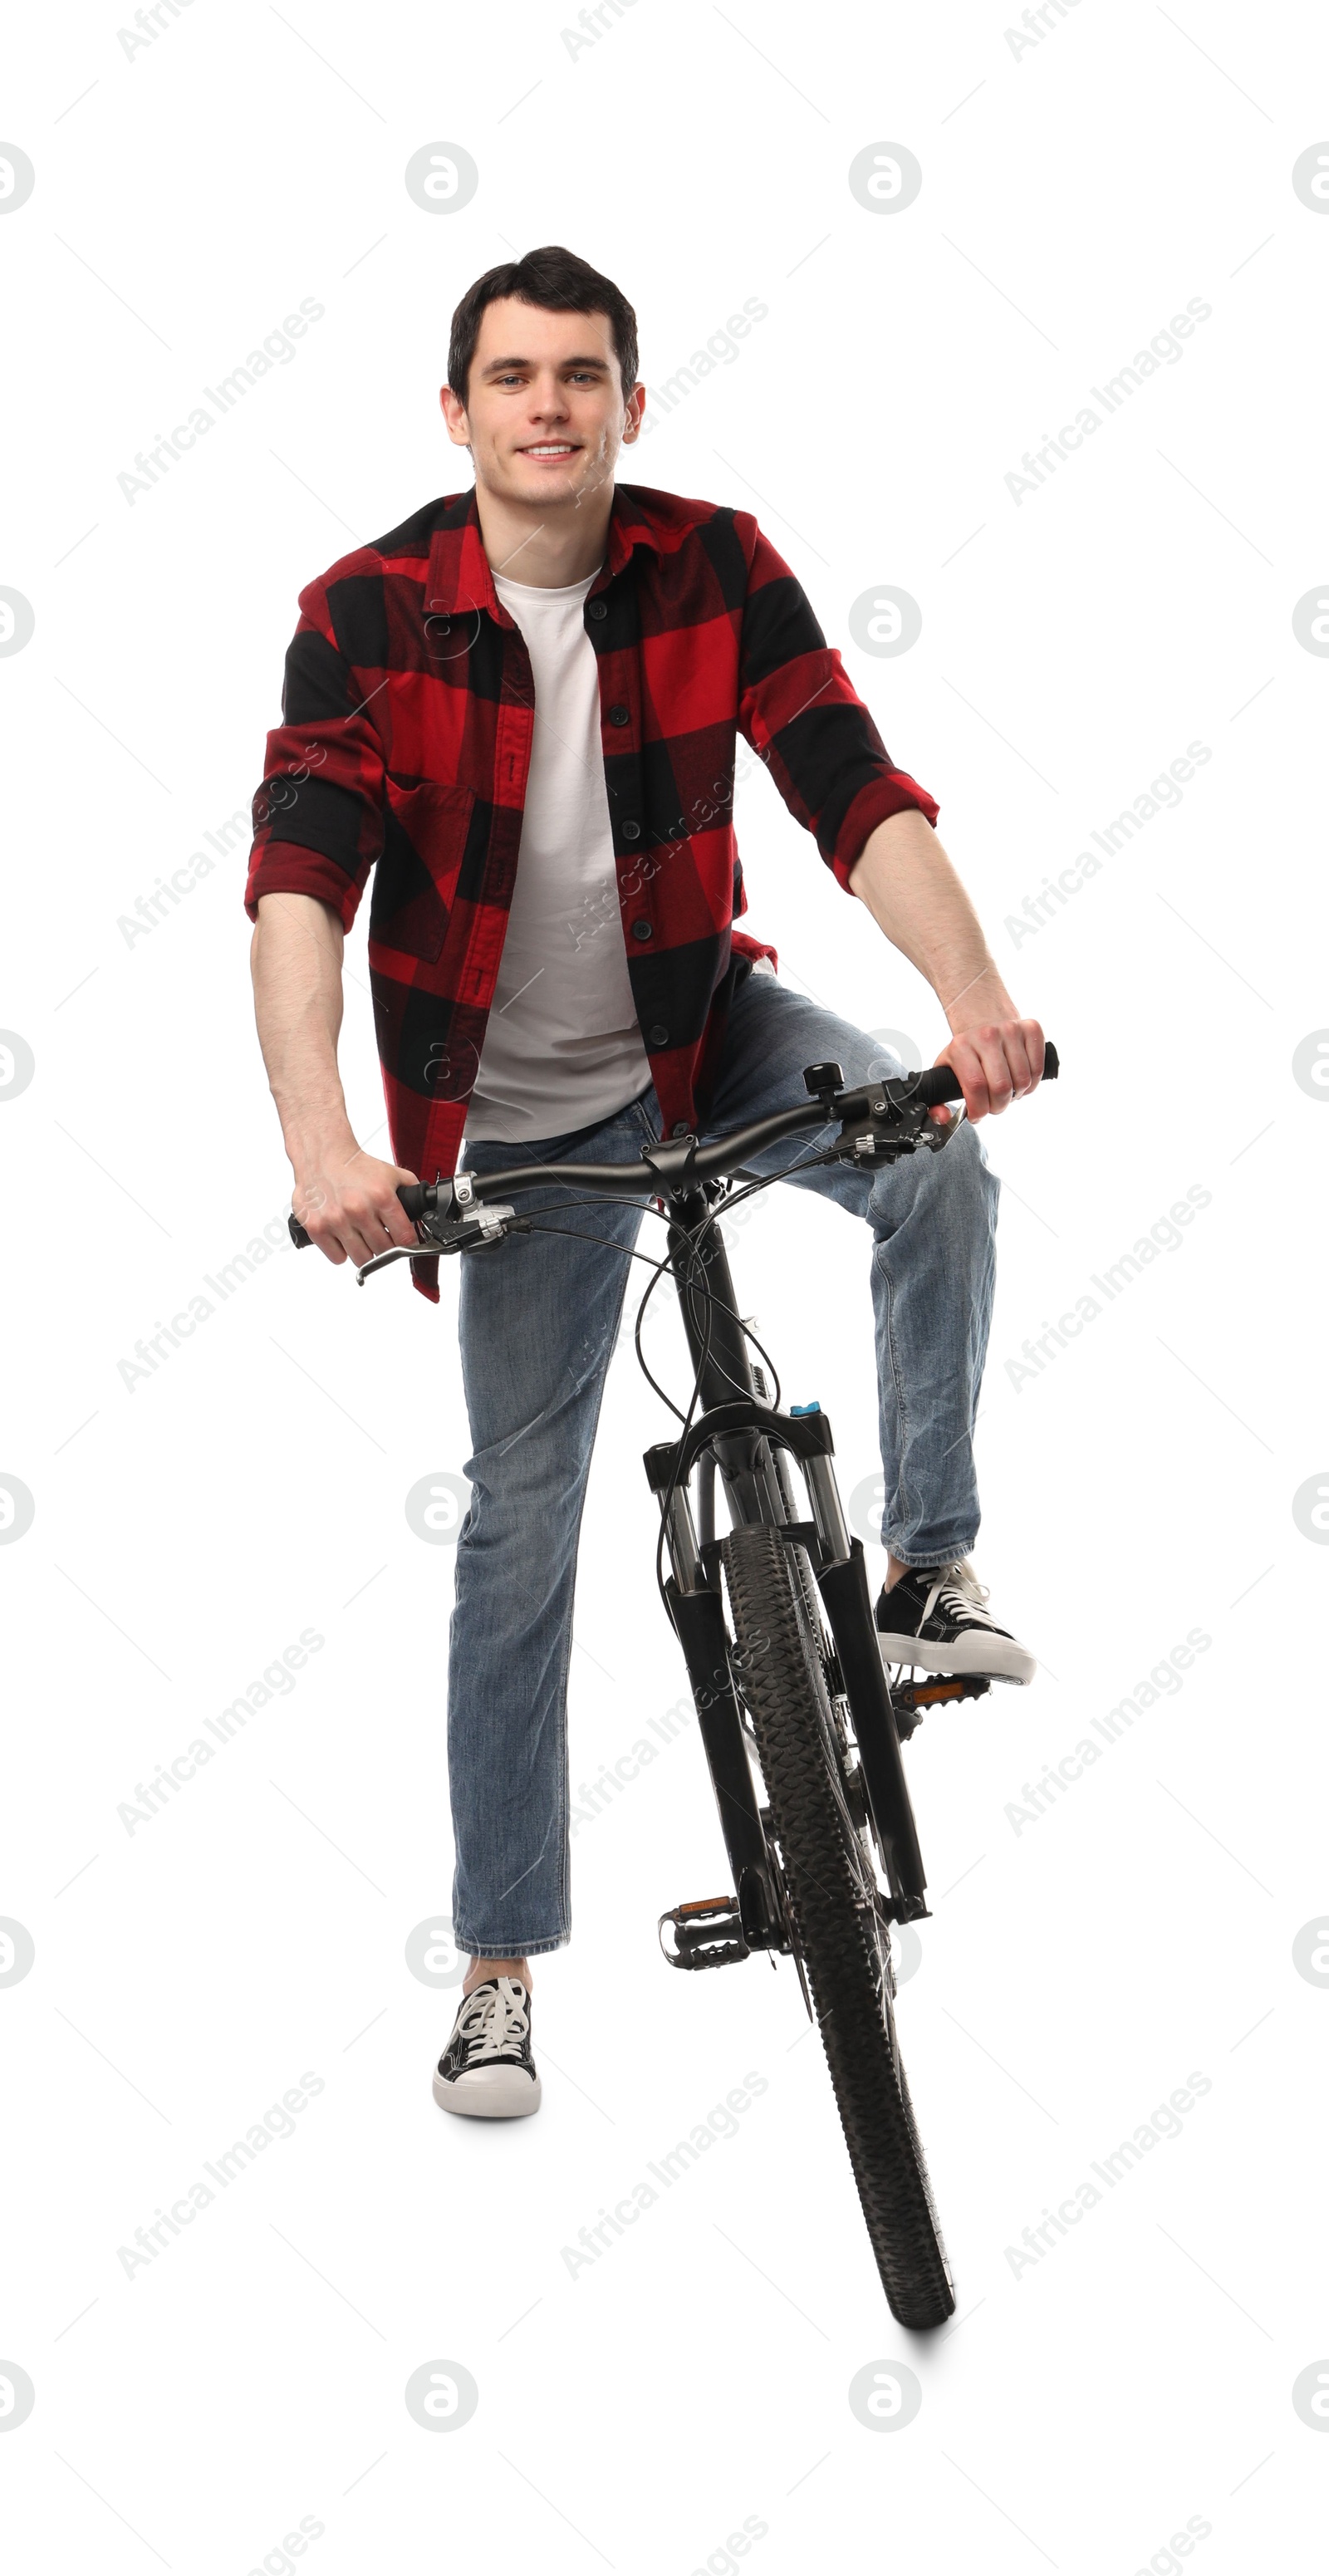 Photo of Smiling man on bicycle against white background